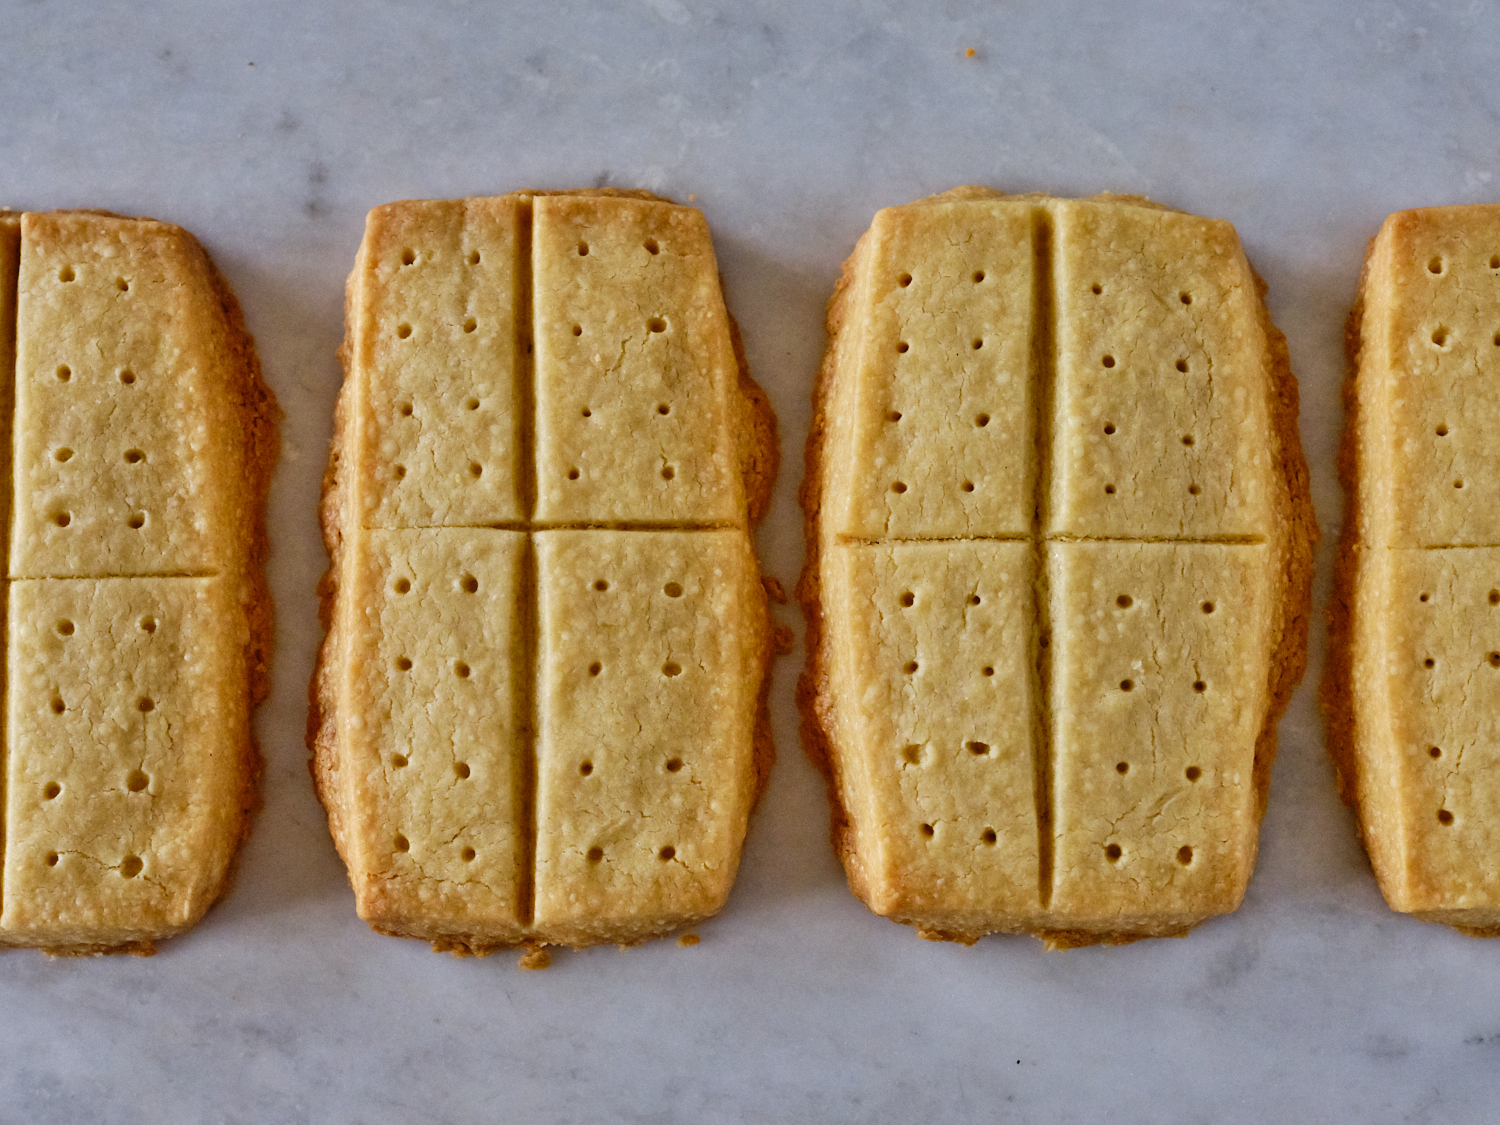 A Close-up of Four Freshly Baked Shortbread Cookies